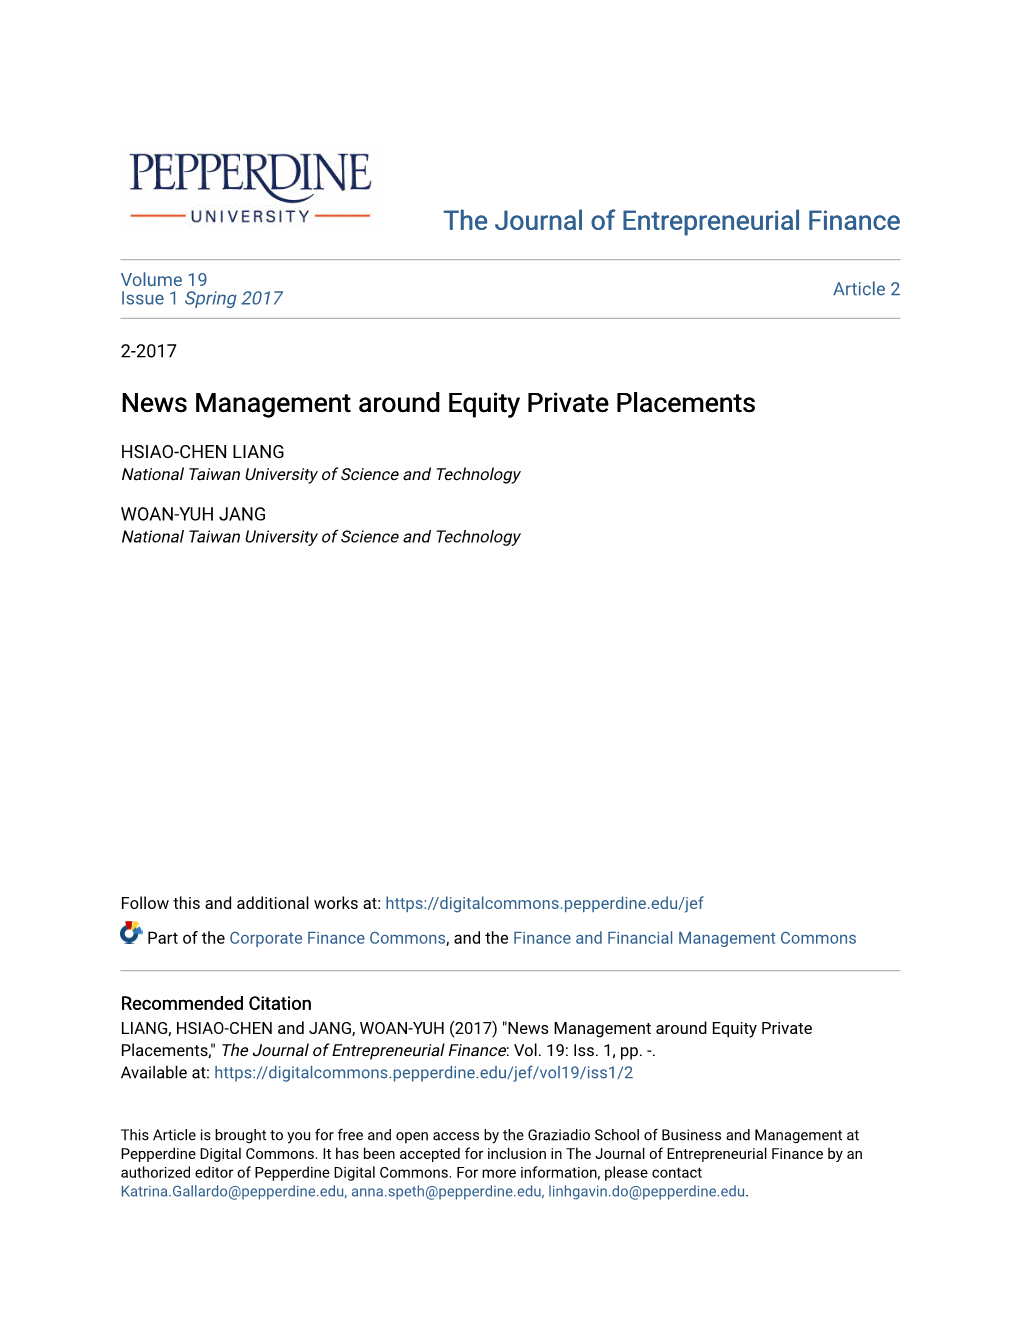 News Management Around Equity Private Placements